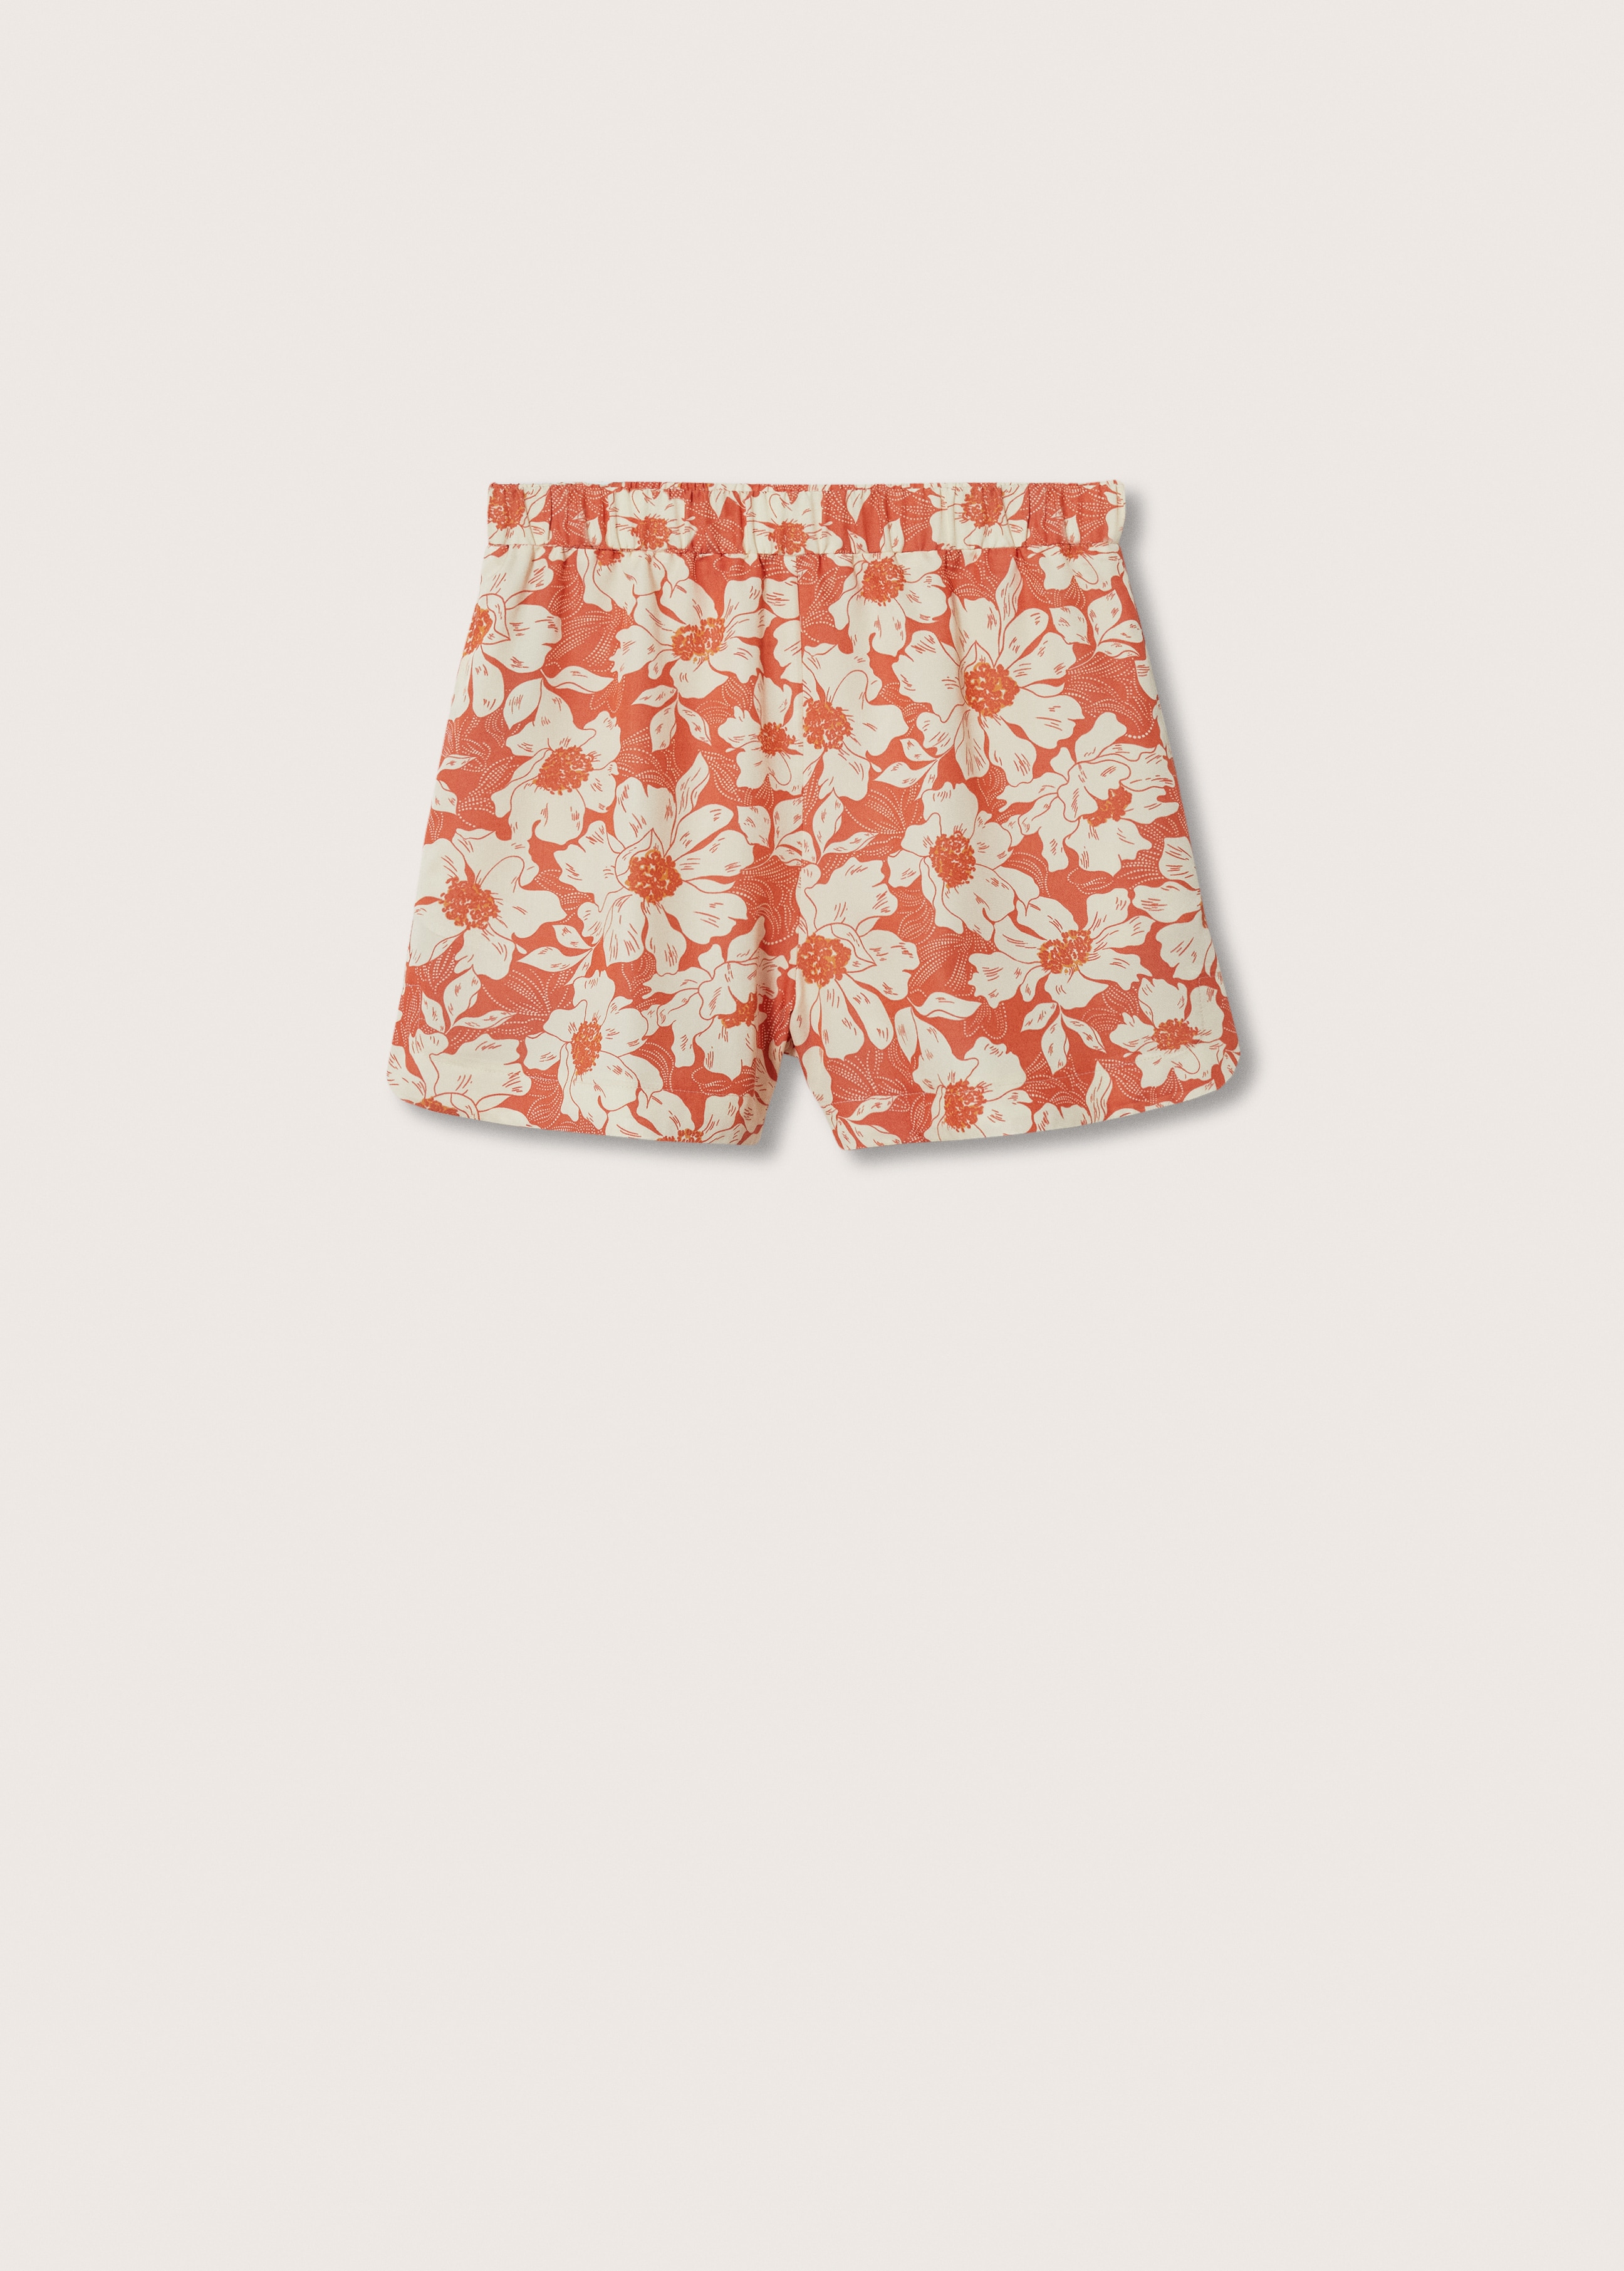 Floral print shorts - Article without model